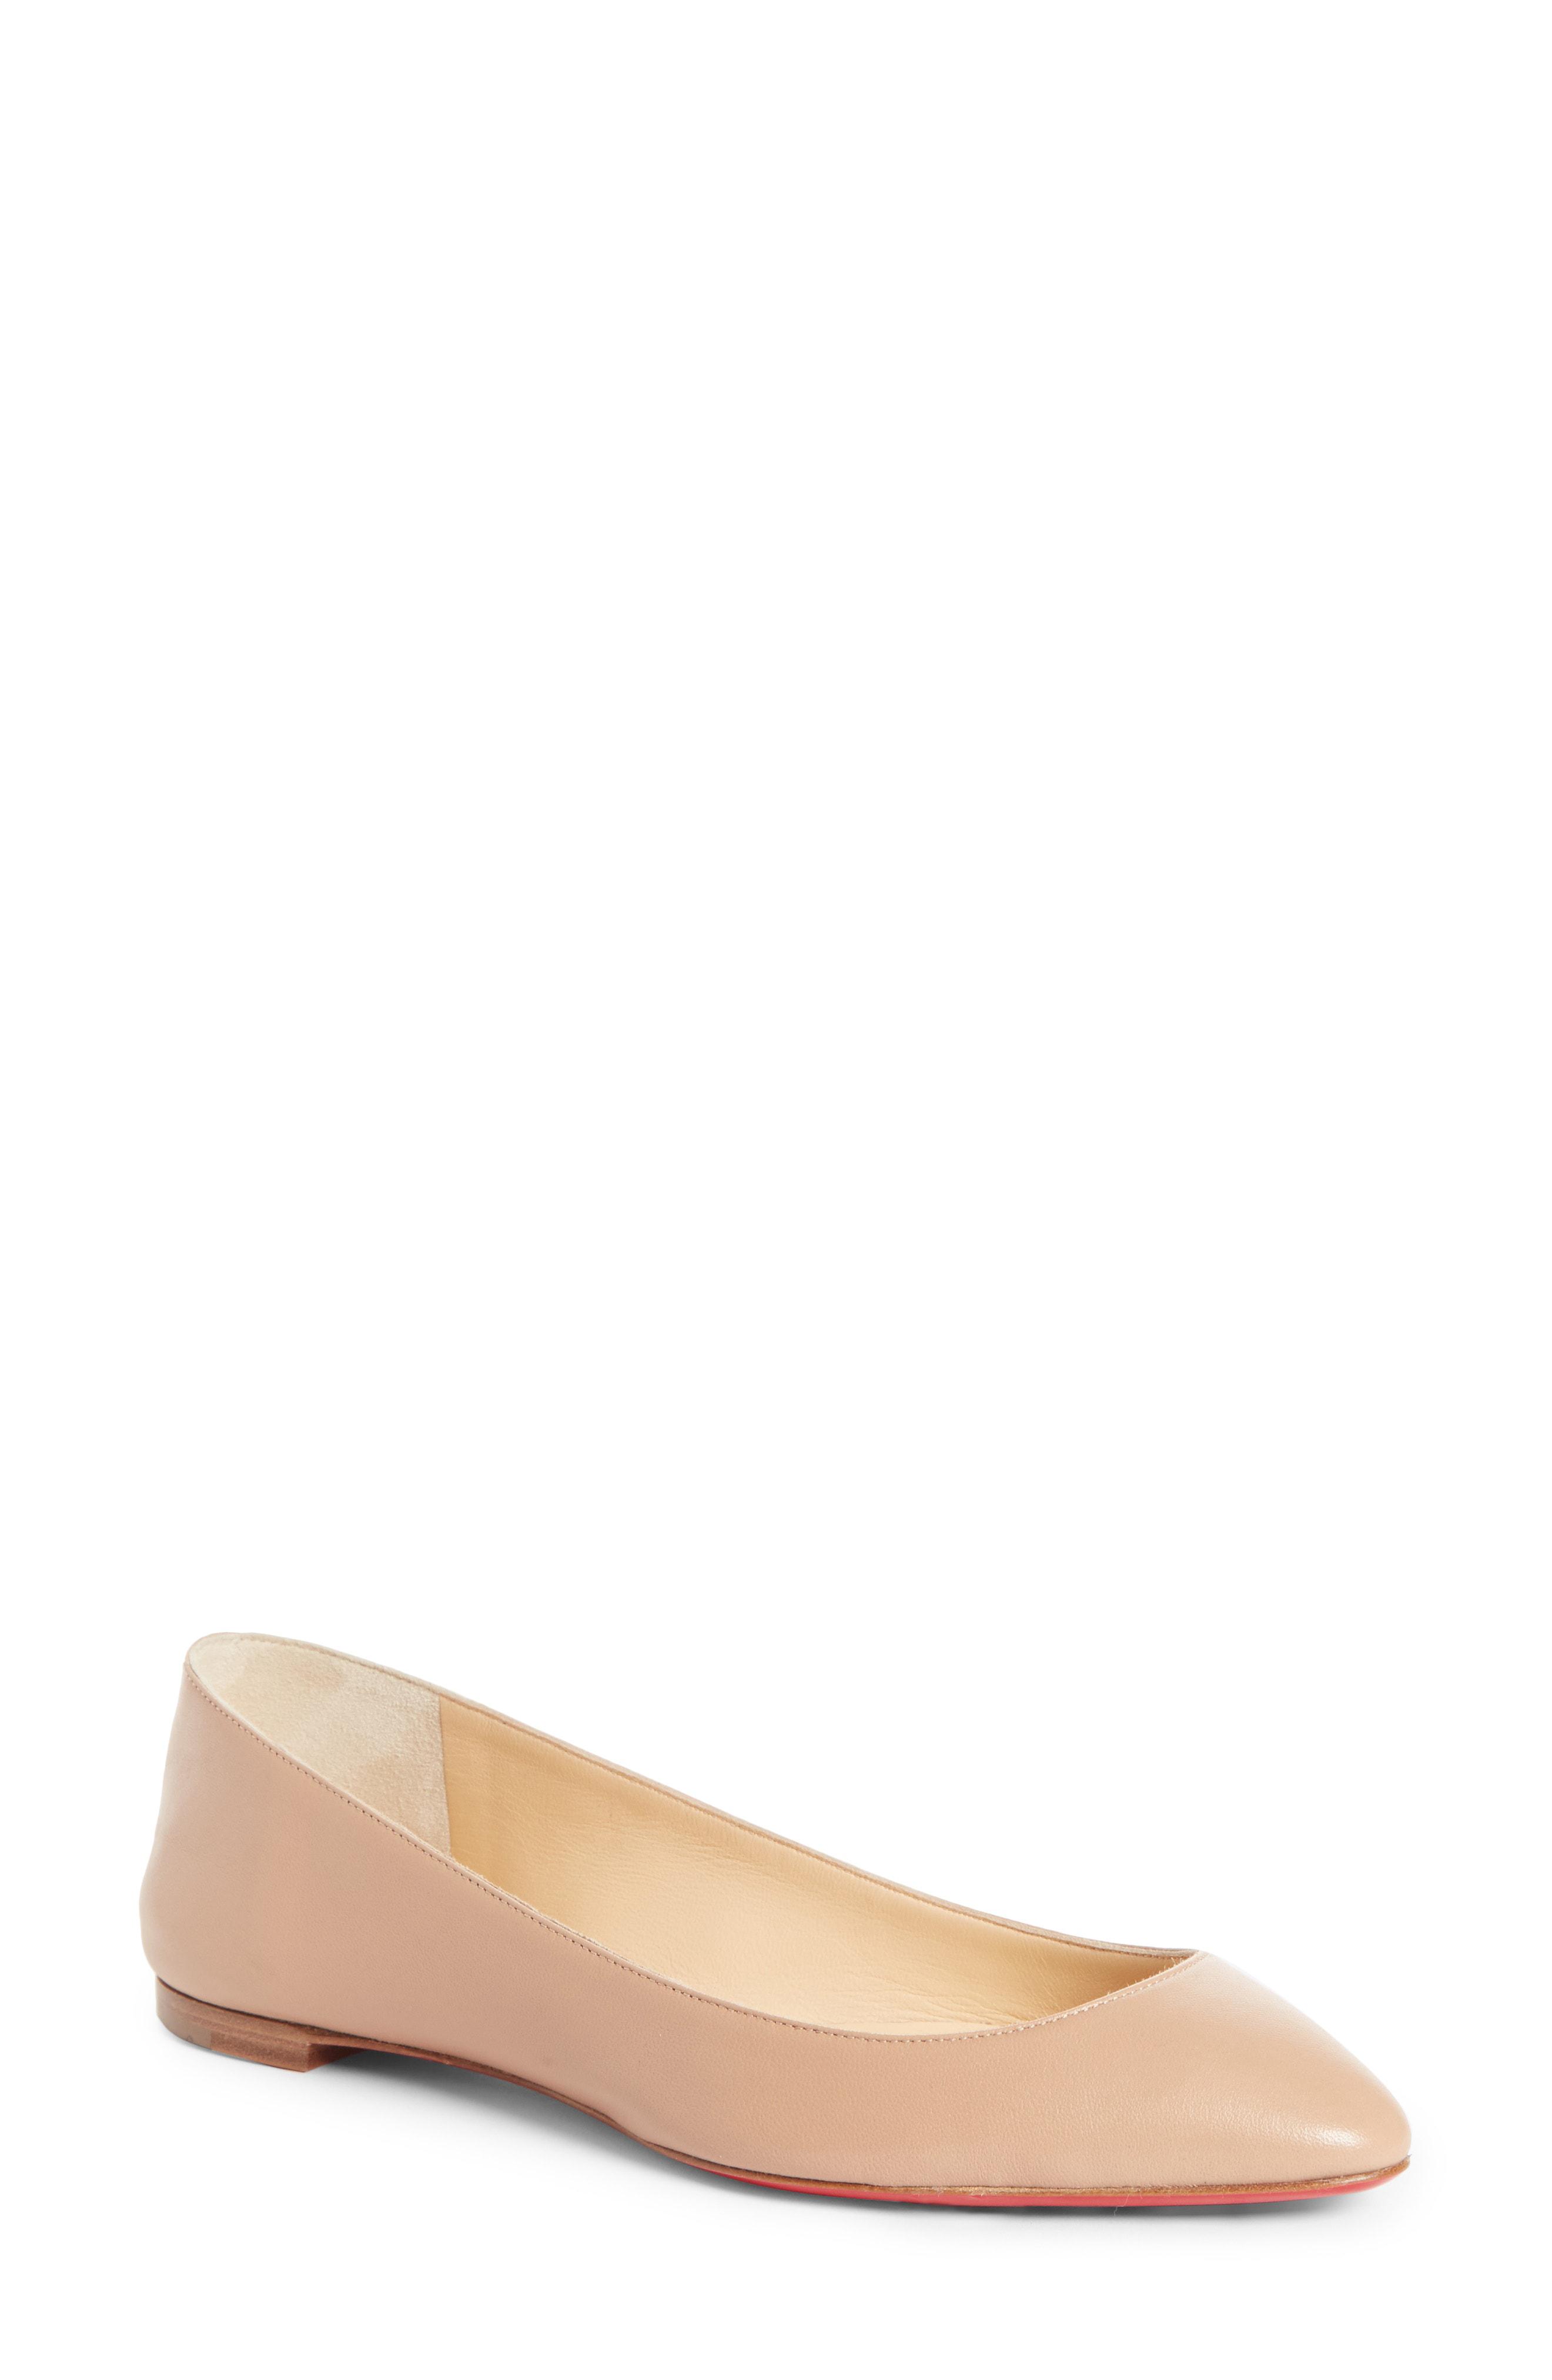 Christian Louboutin Women's Eloise Leather Flats - Nude in Natural - Lyst